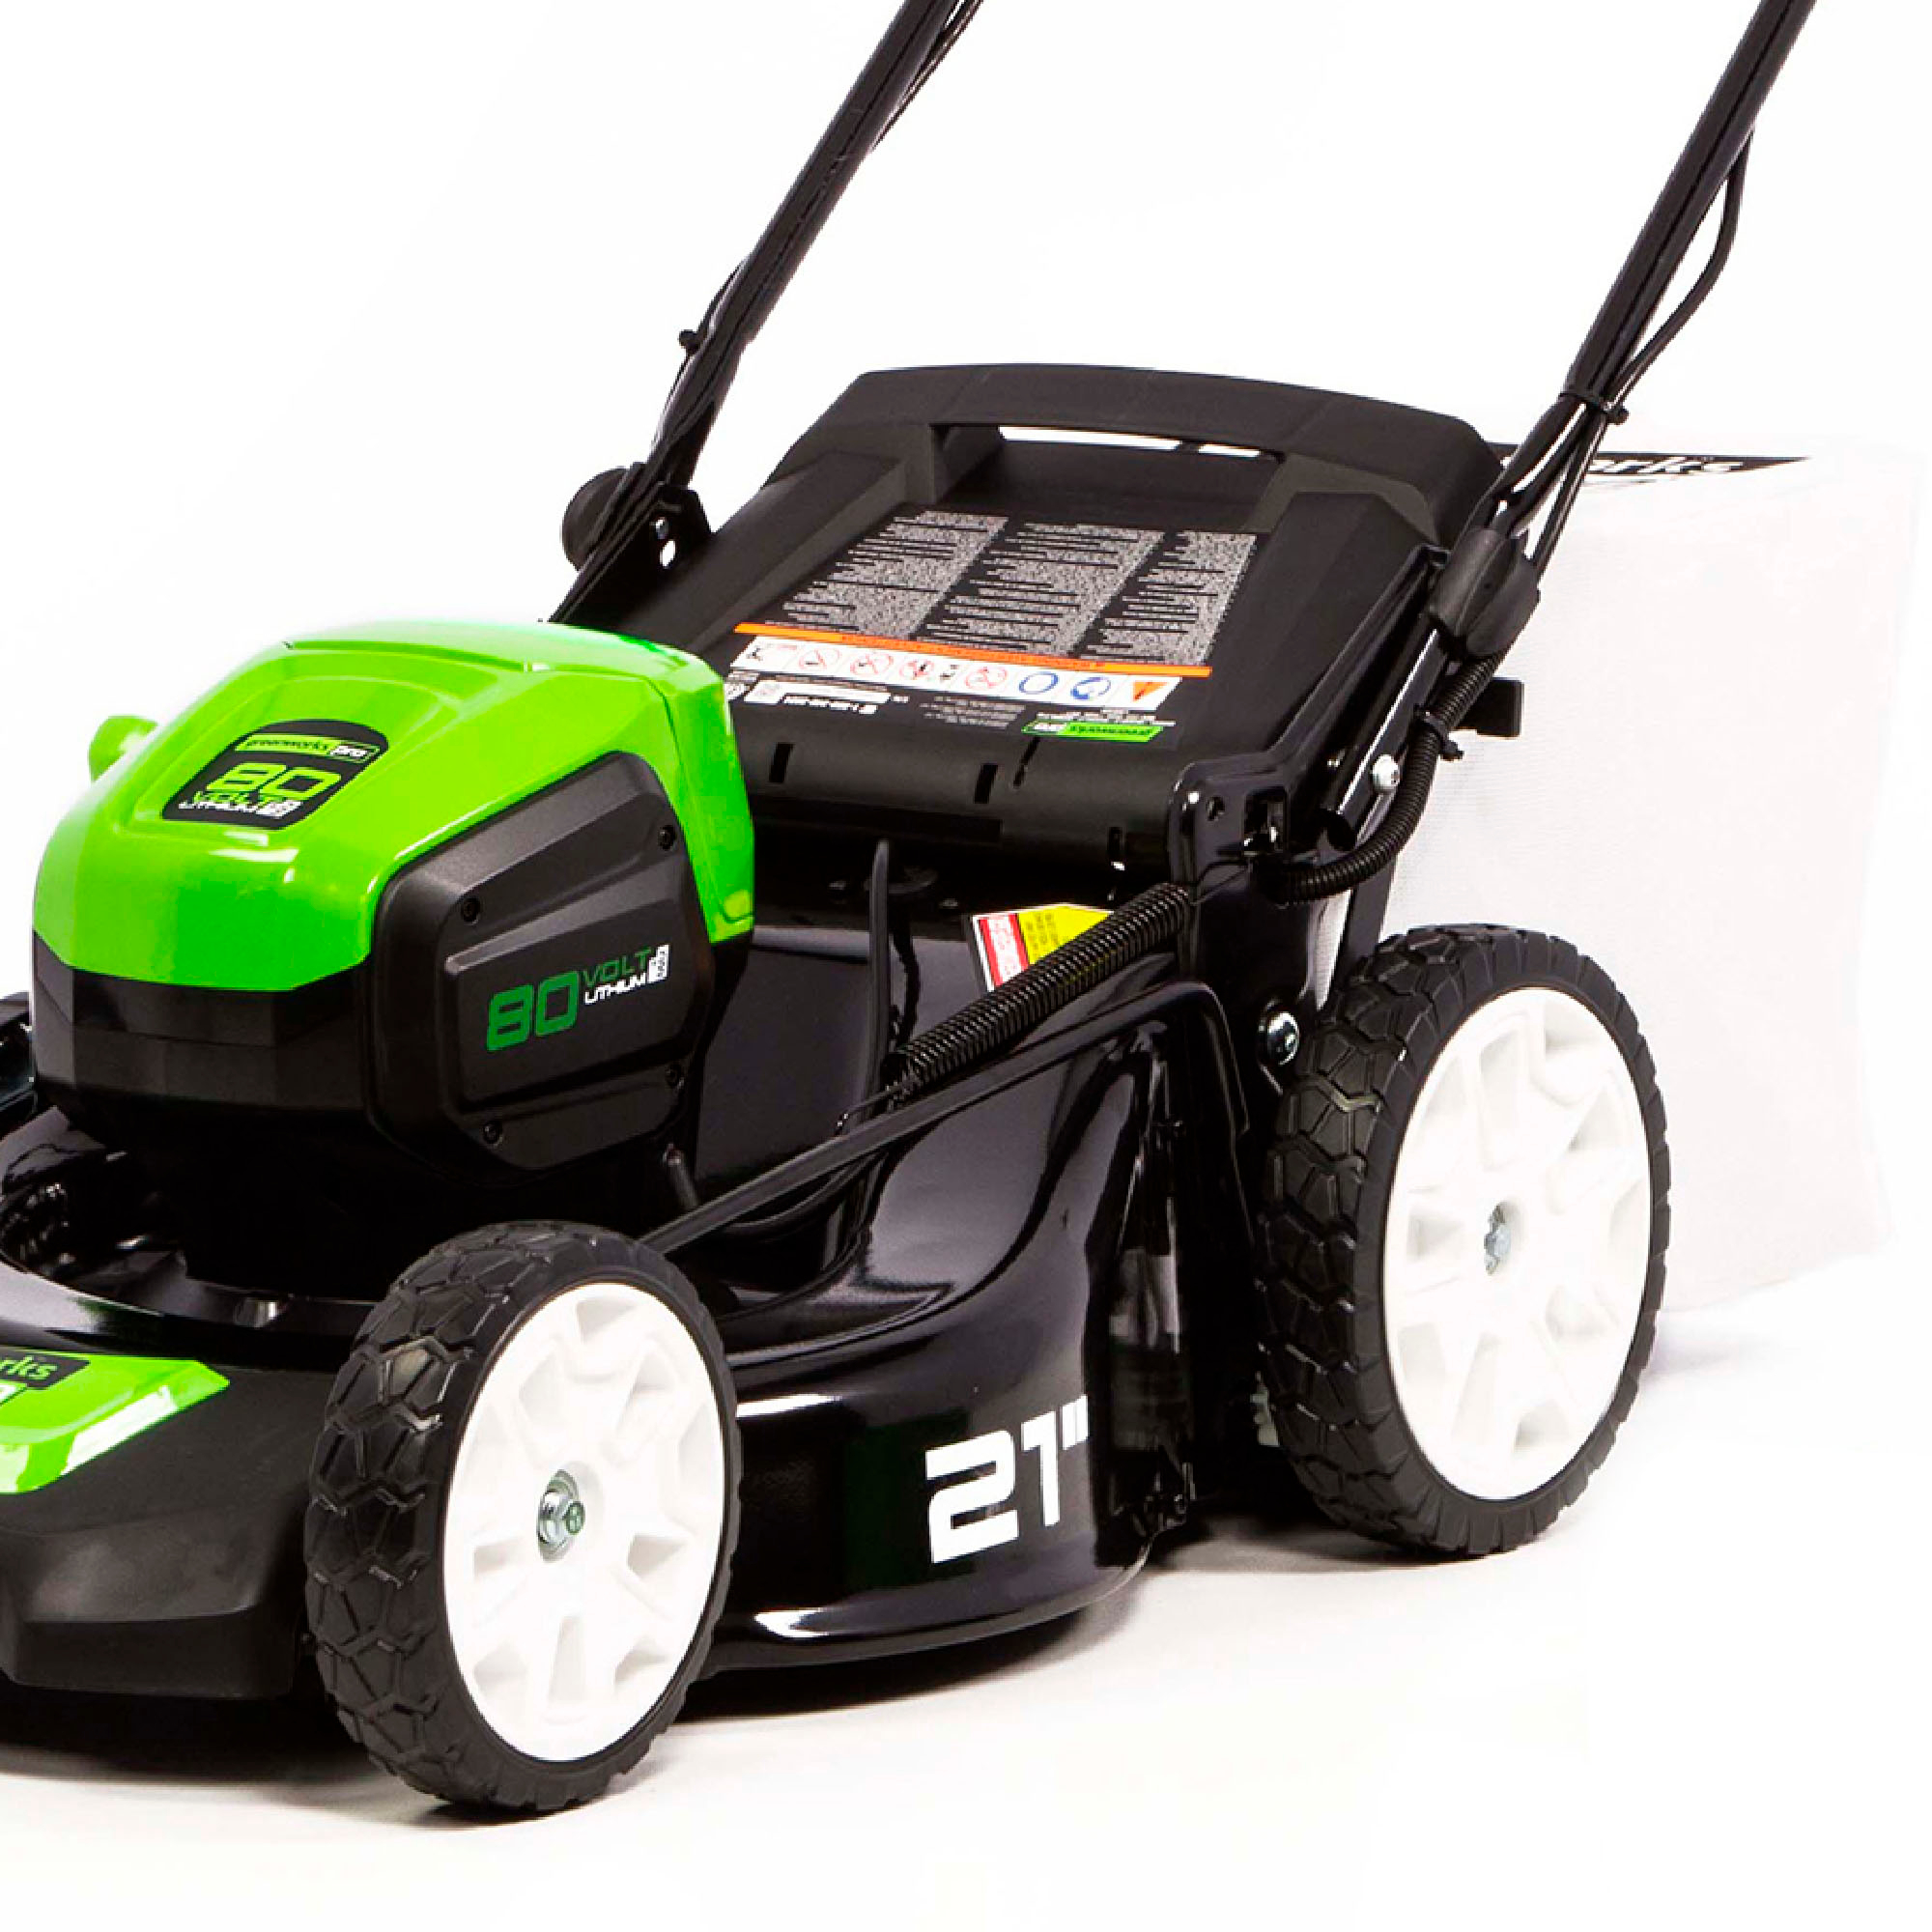 Left View: Greenworks - 80 Volt 21-Inch Self-Propelled Lawn Mower (1 x 2.0Ah and 1 x 4.0Ah battery and 1 x Charger) - Green